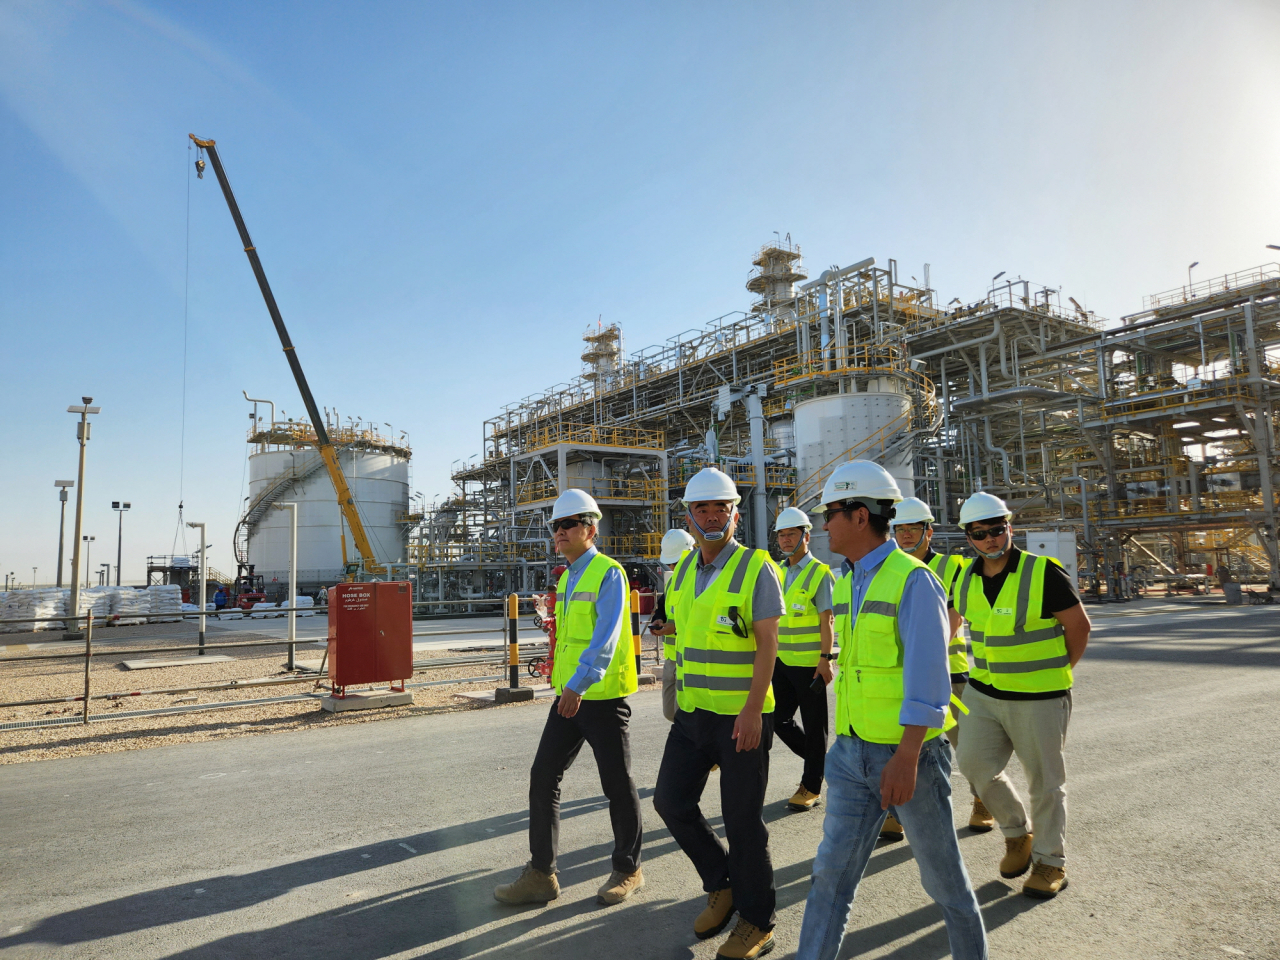 Jungheung Group Vice Chairman Jung Won-ju visits the construction site of Daewoo E&C's Duqm oil refinery facility in Oman in February. (Daewoo Engineering & Construction)